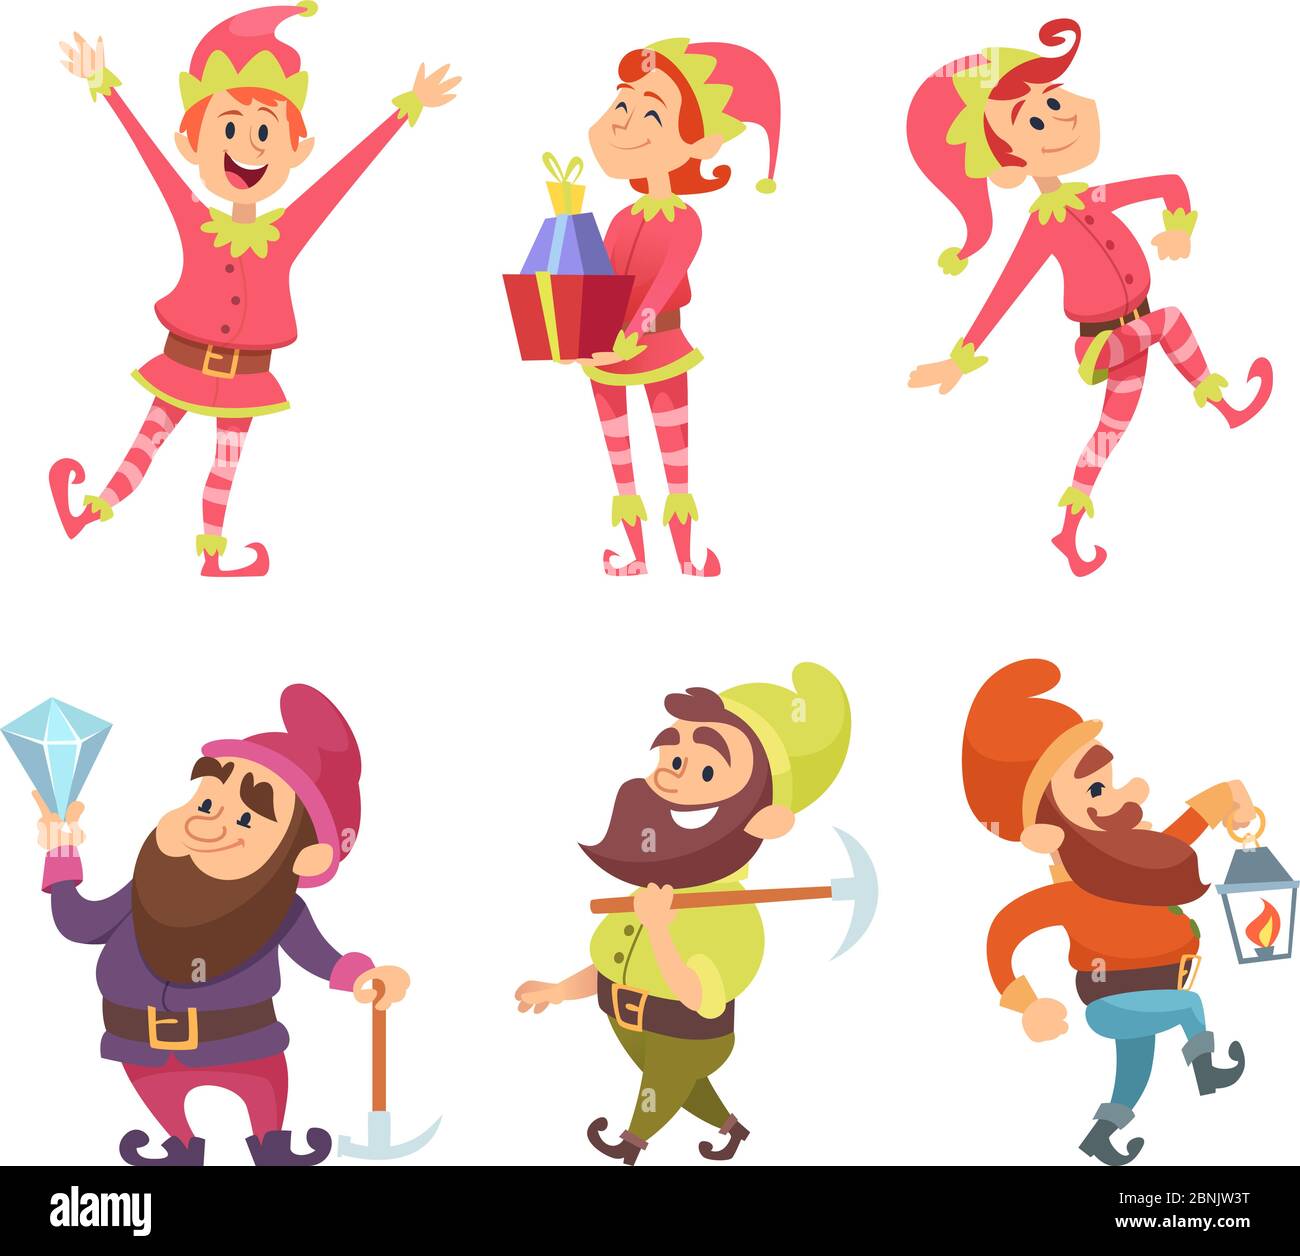 Dwarves and elves. Funny fairytale characters in dynamic poses Stock Vector